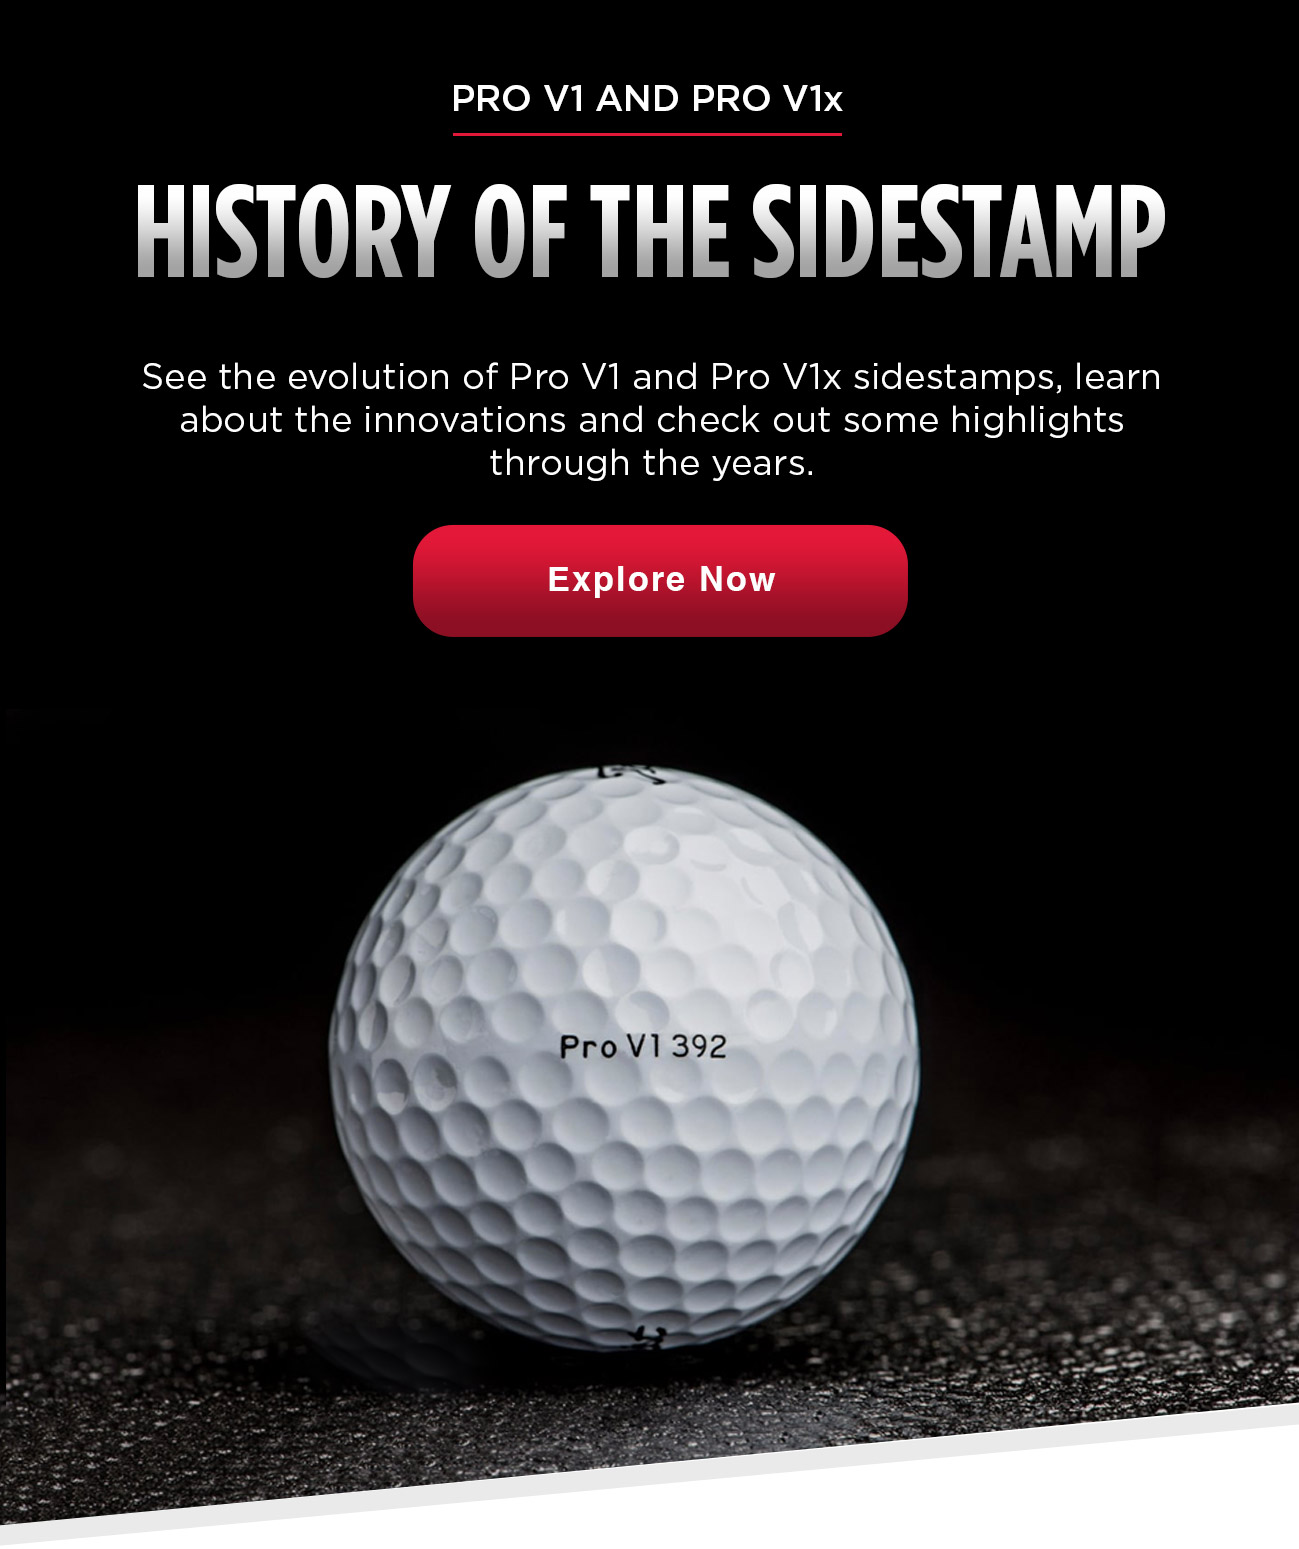 History of the Sidestamp